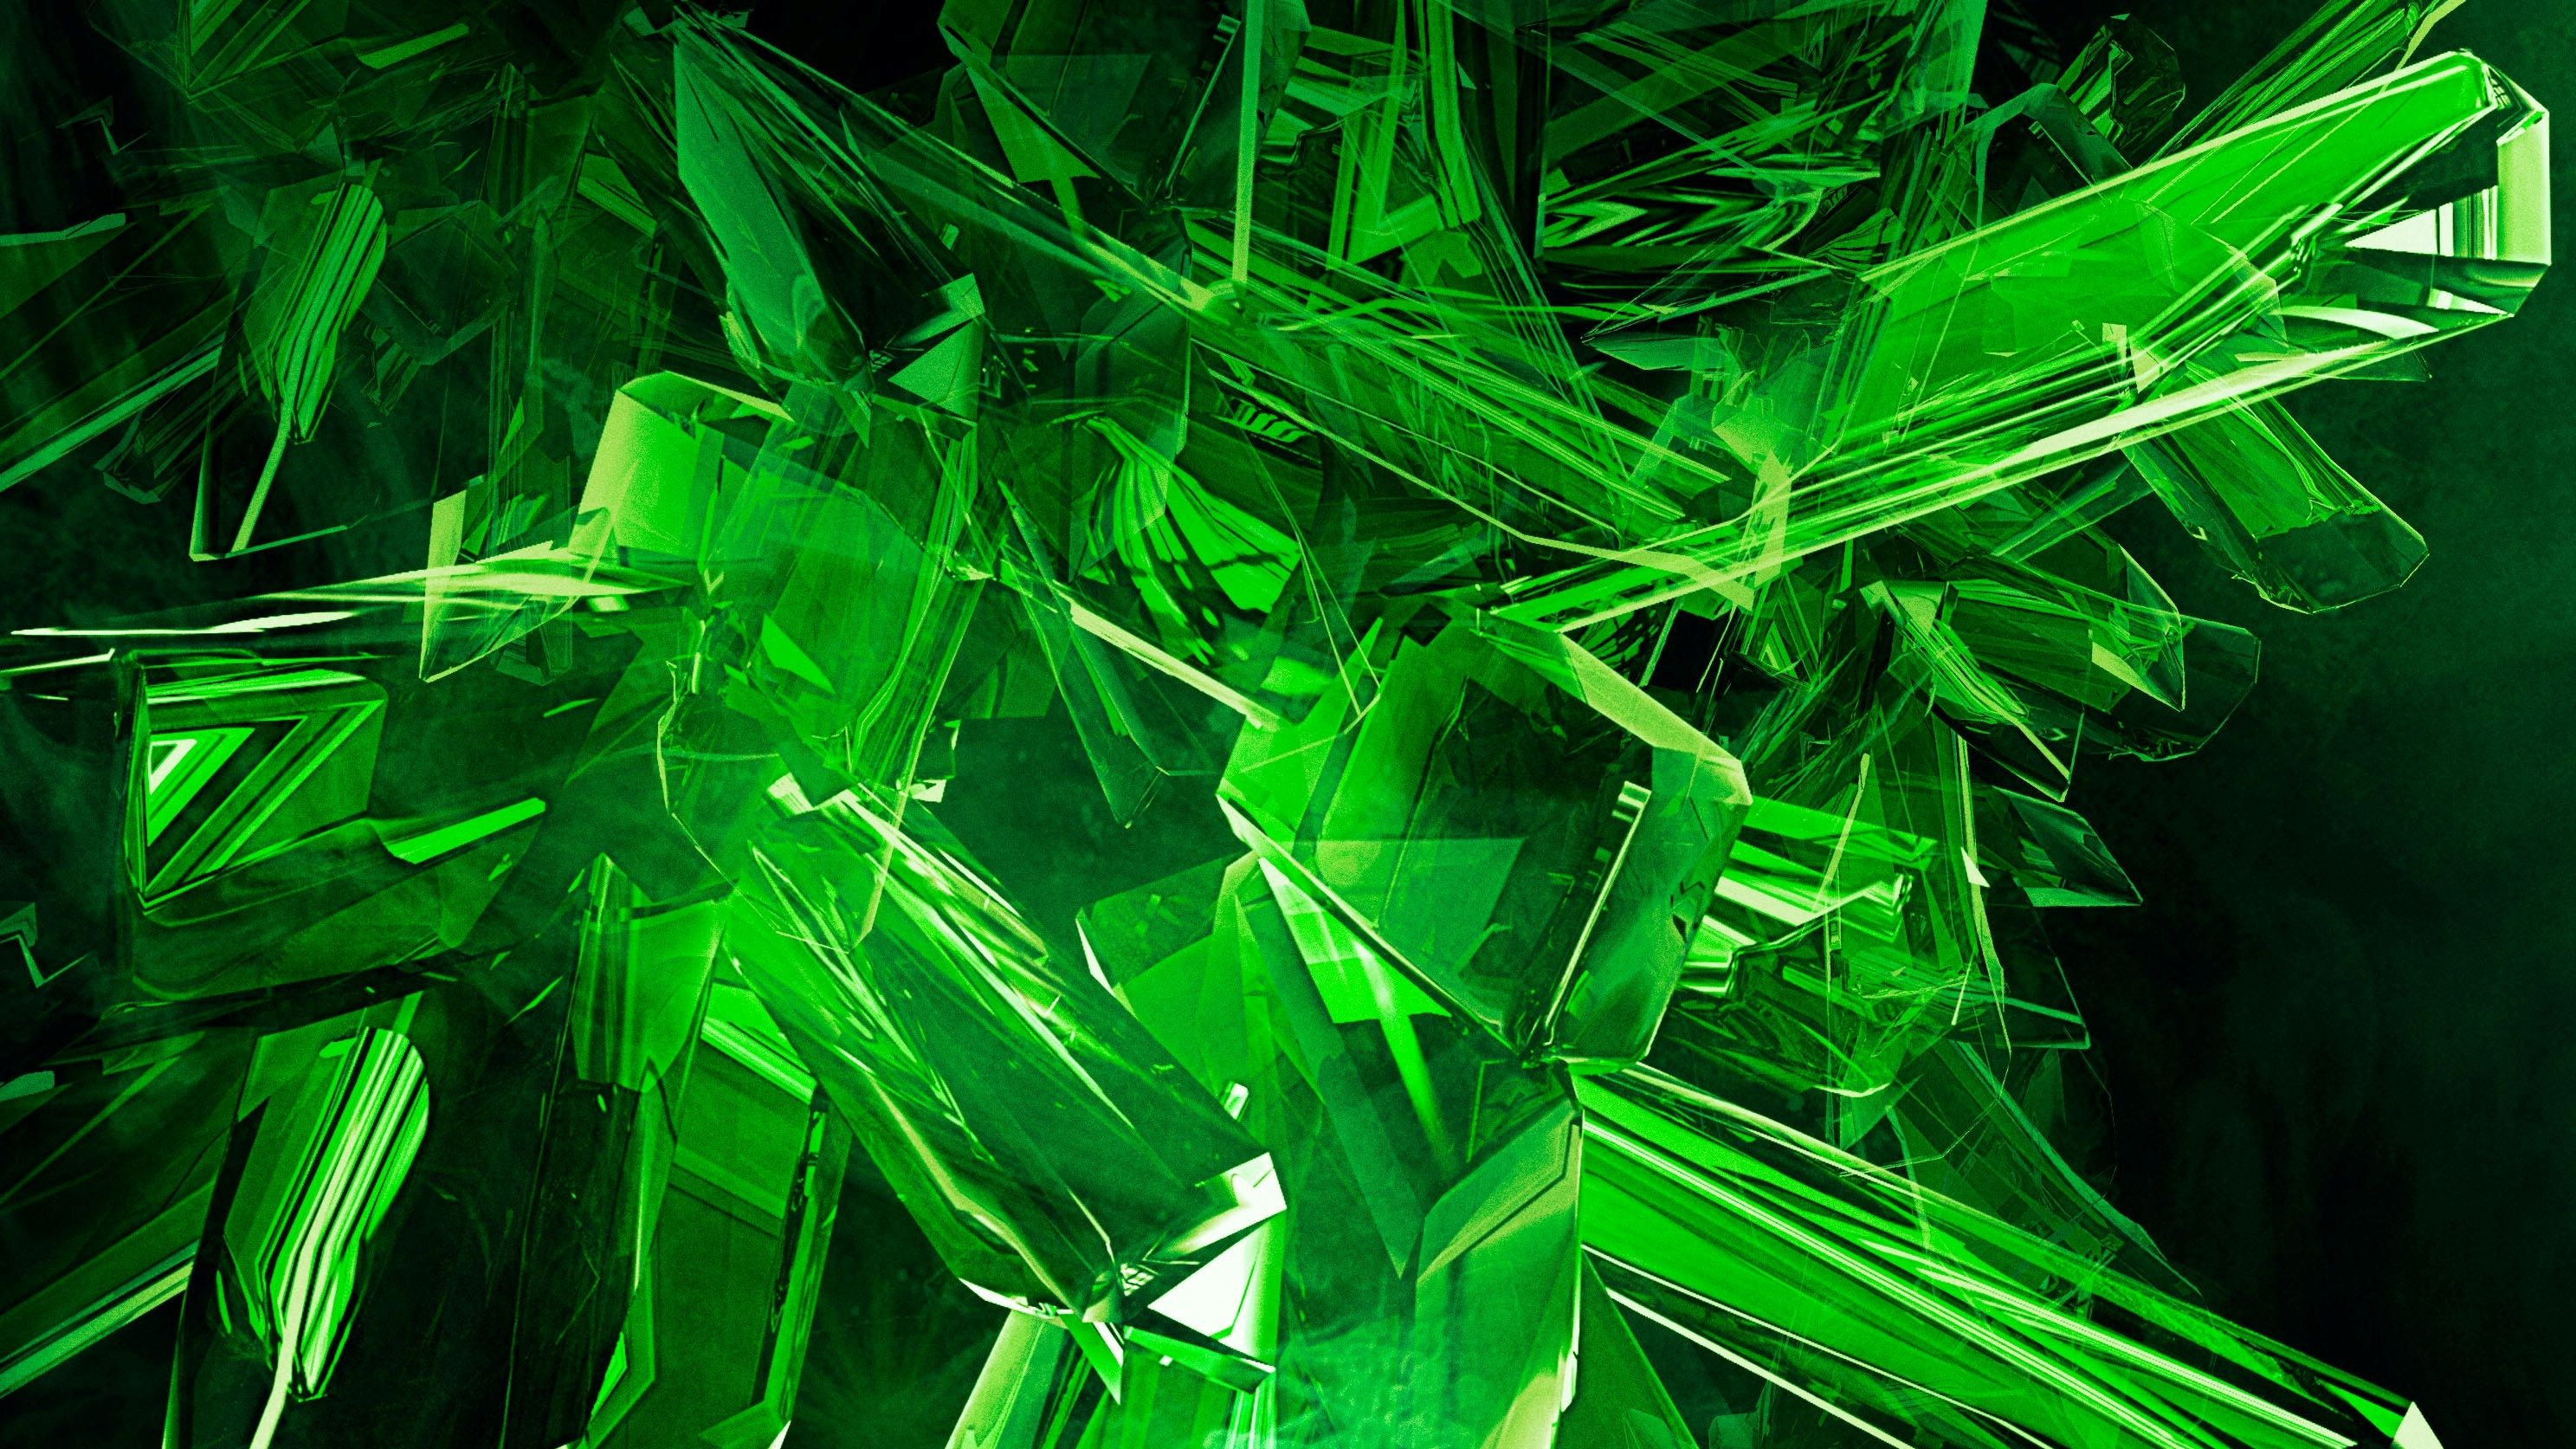 Green Awesome Background. Awesome Wallpaper, Awesome Background and Awesome Minecraft Wallpaper